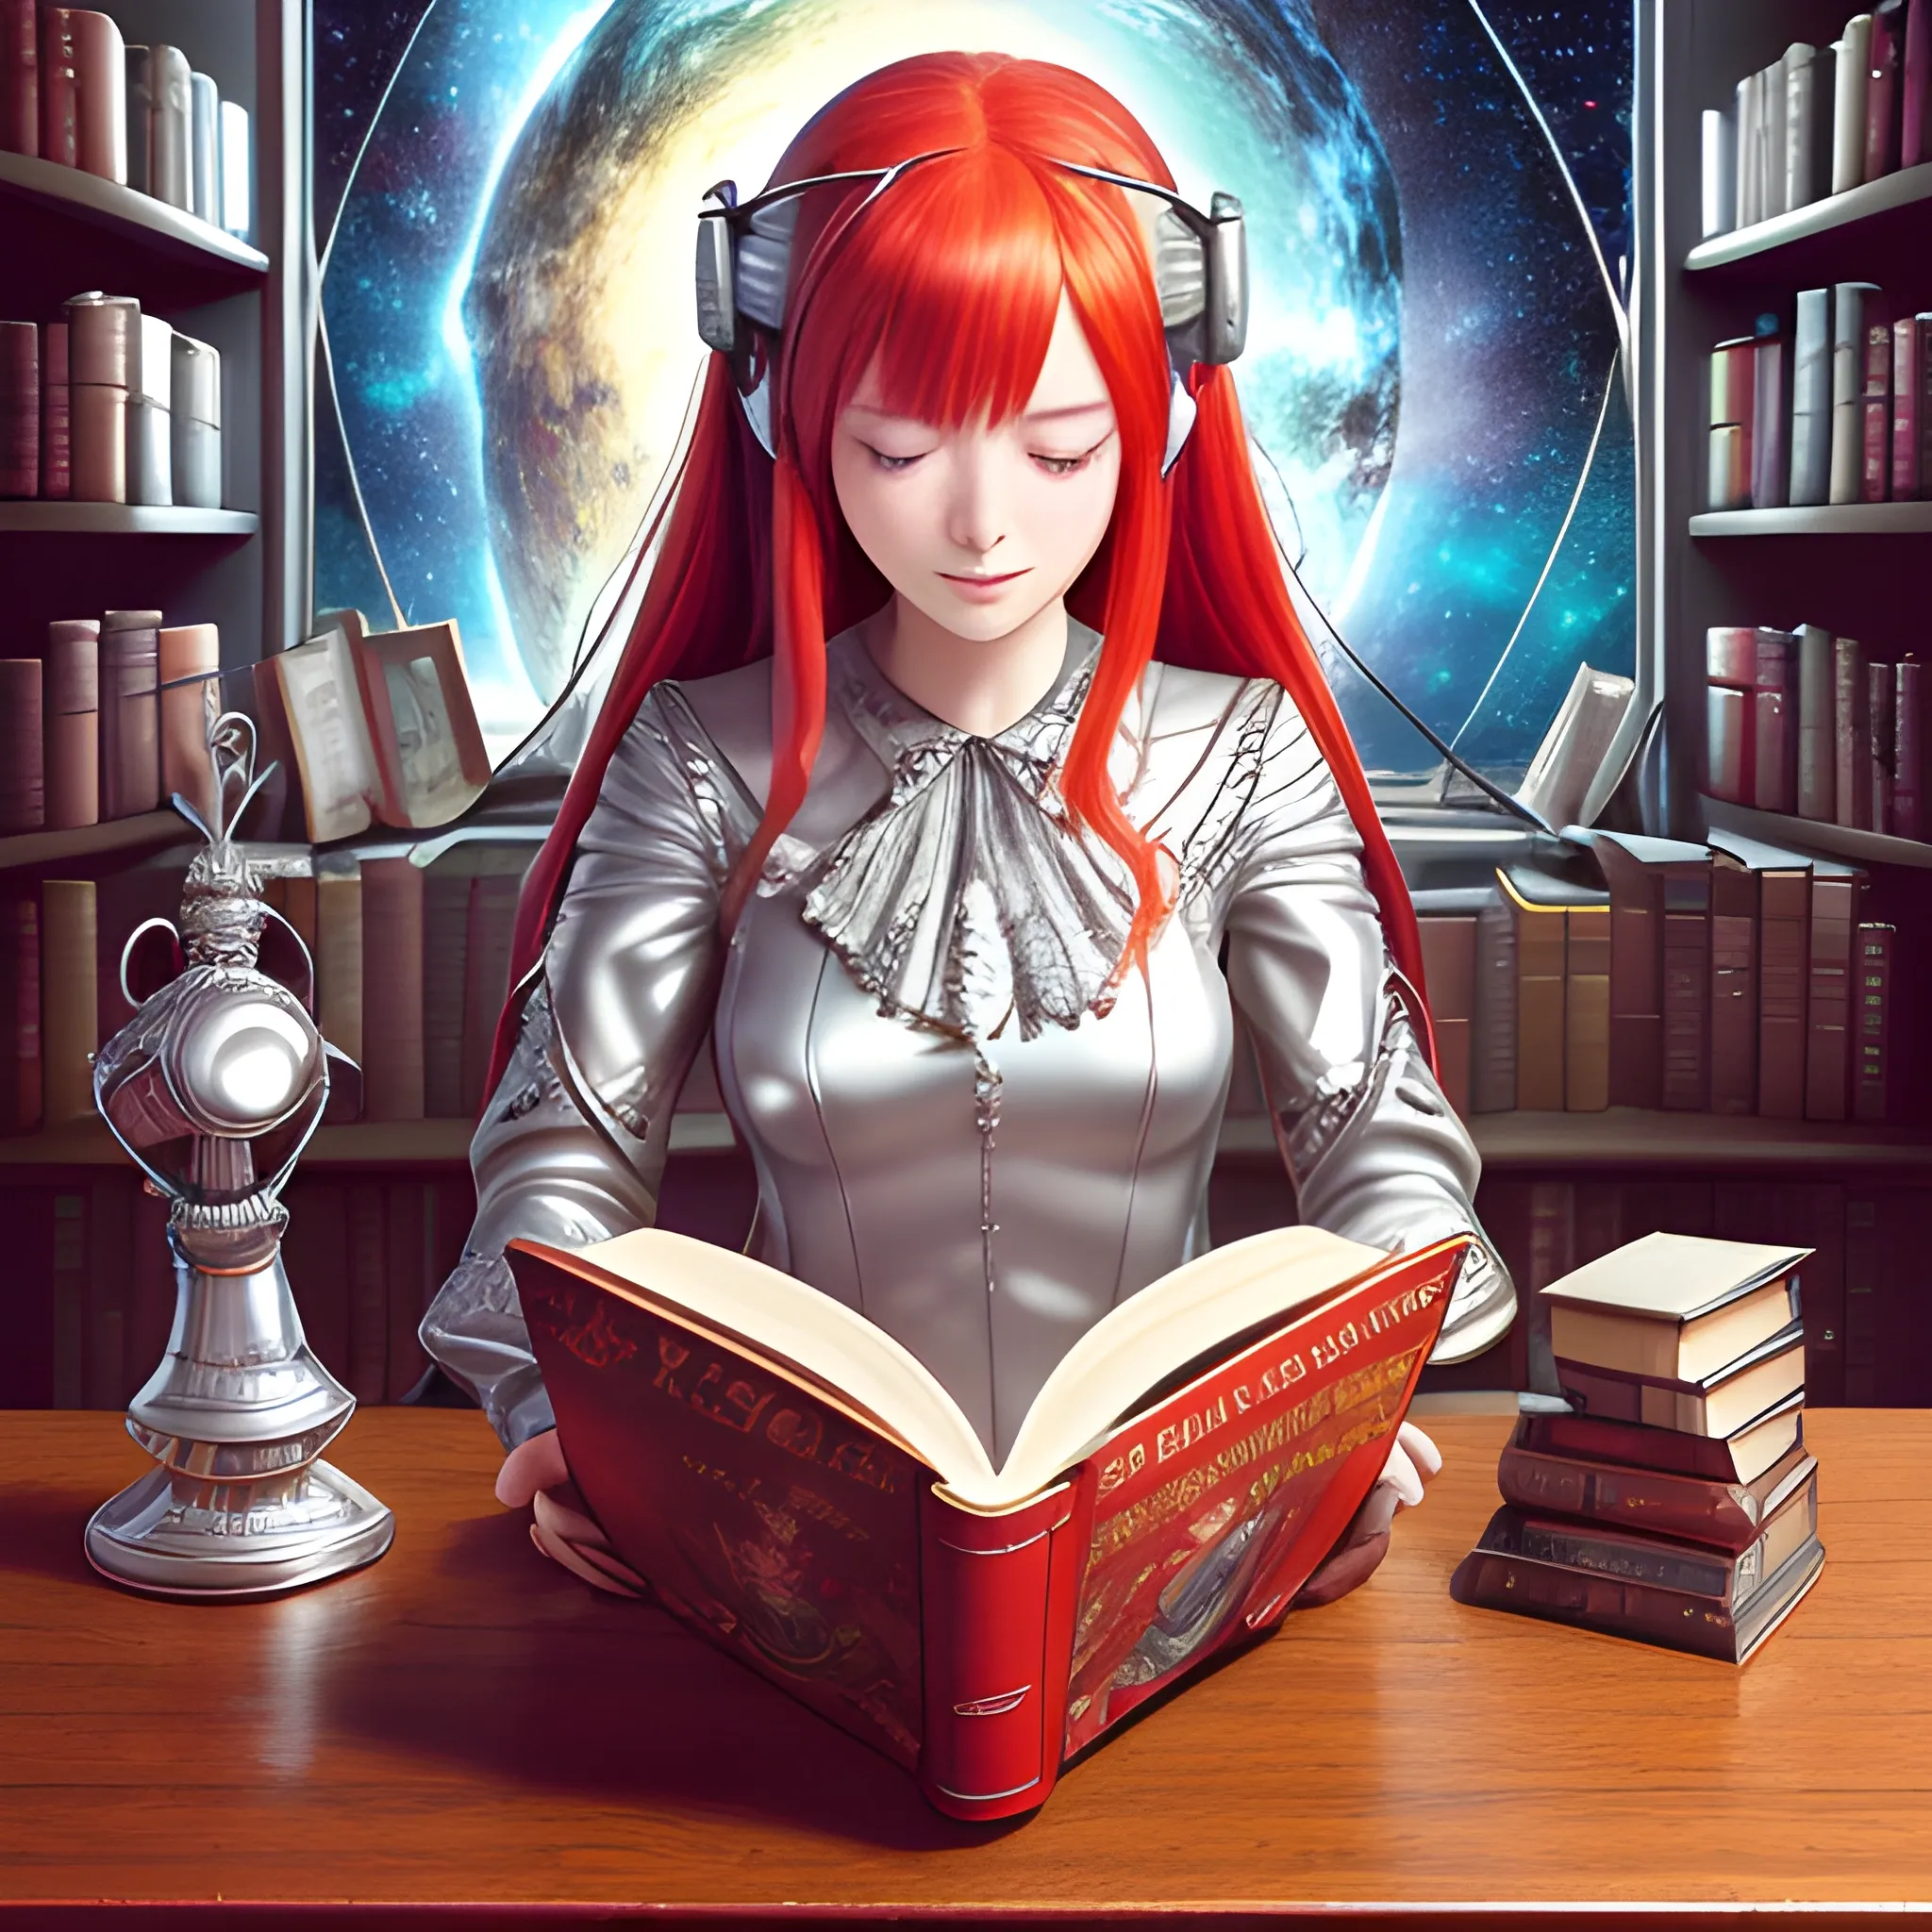 Cute Anime Girl, Reading Book, With Warm Light, 3 Hi-res JPEG - Etsy